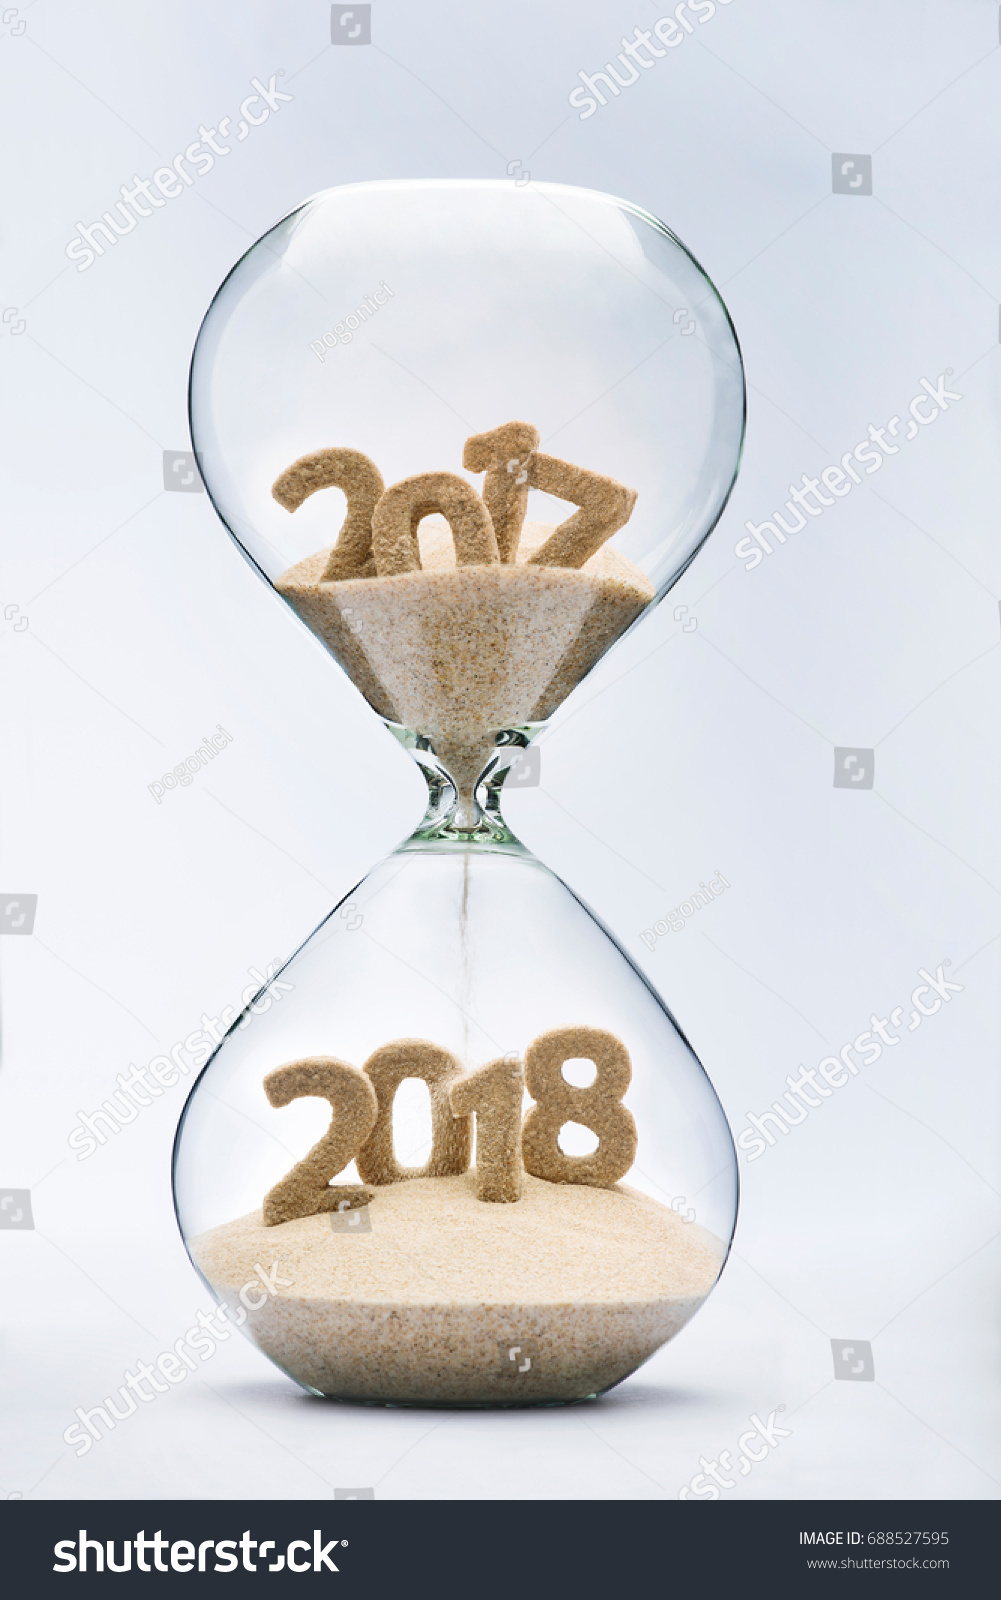 New Year 2018 concept with hourglass falling sand taking the shape of a 2018 #688527595